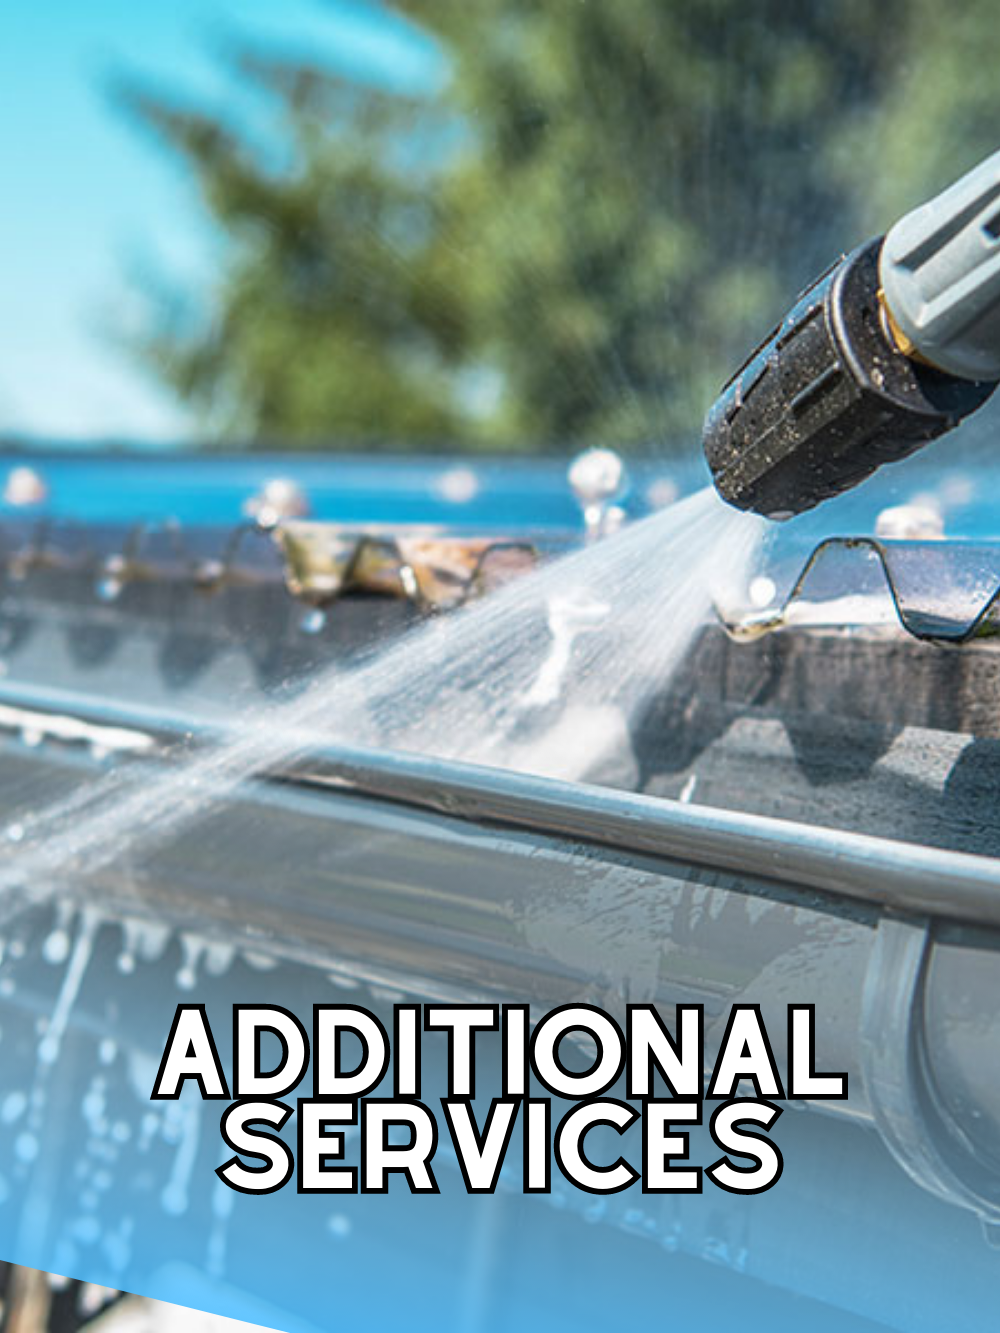 Additional services by Bello Wash Solutions